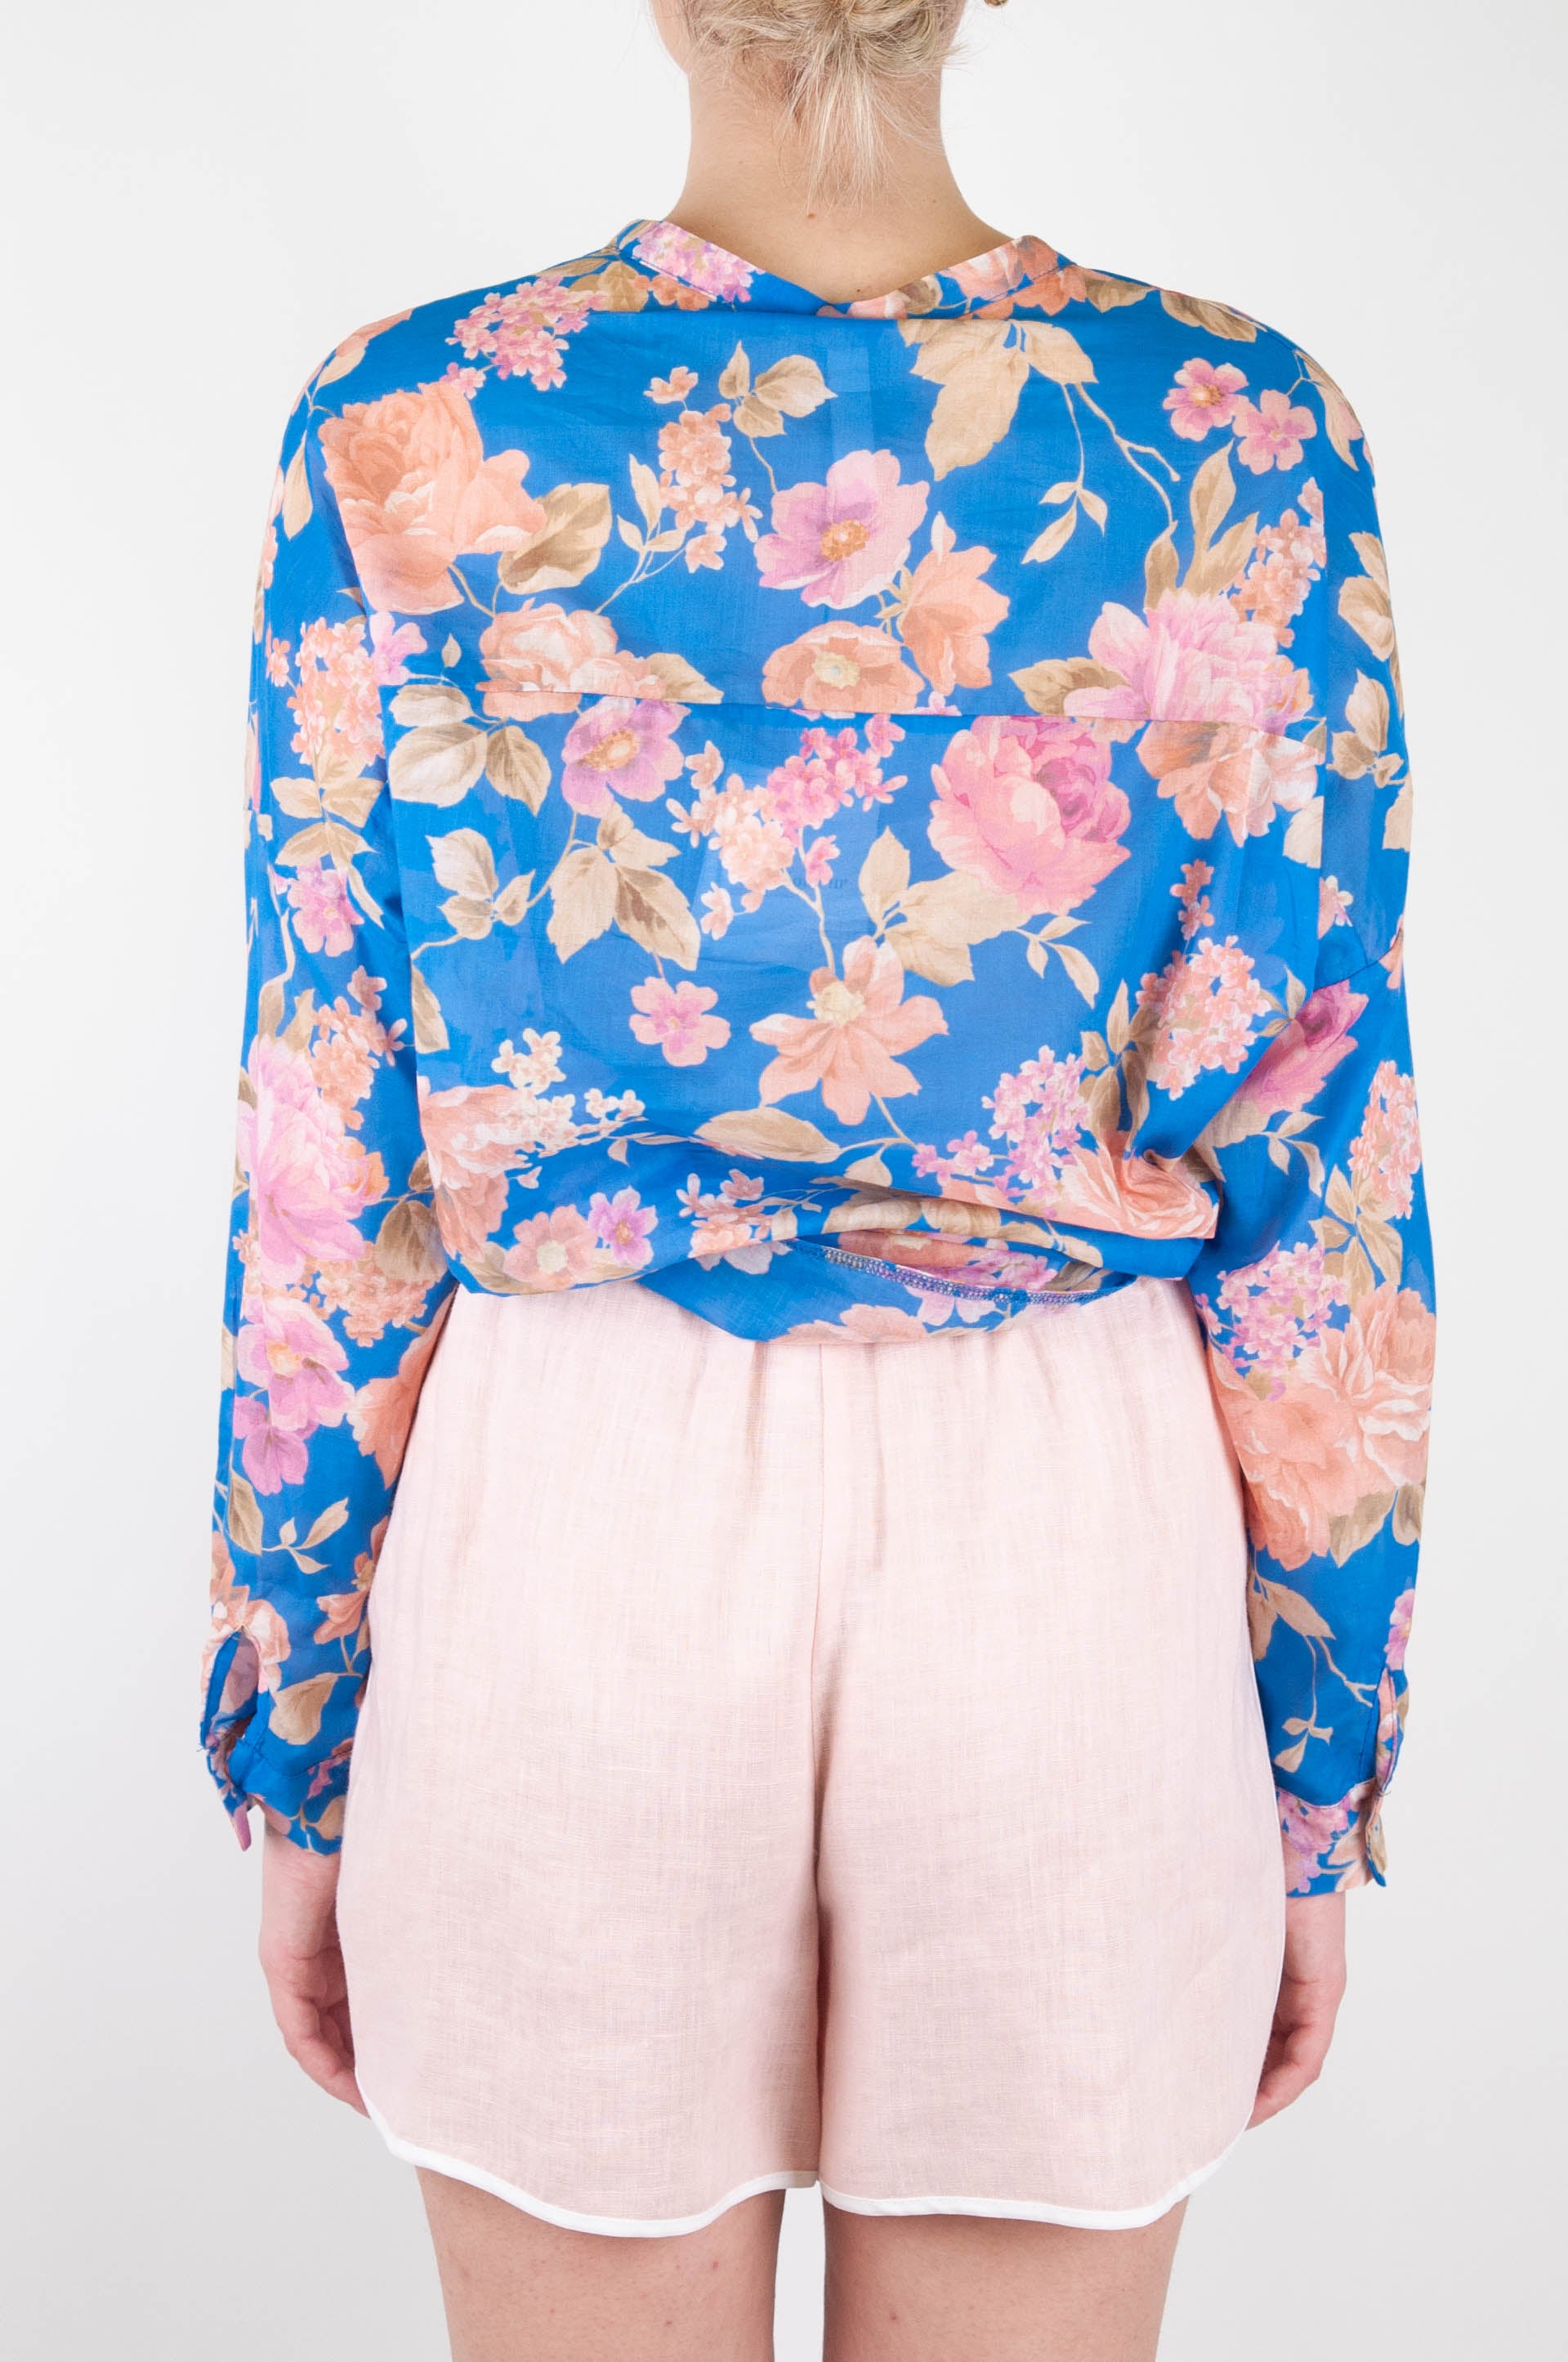 Tension in - Floral patterned shirt in cotton muslin